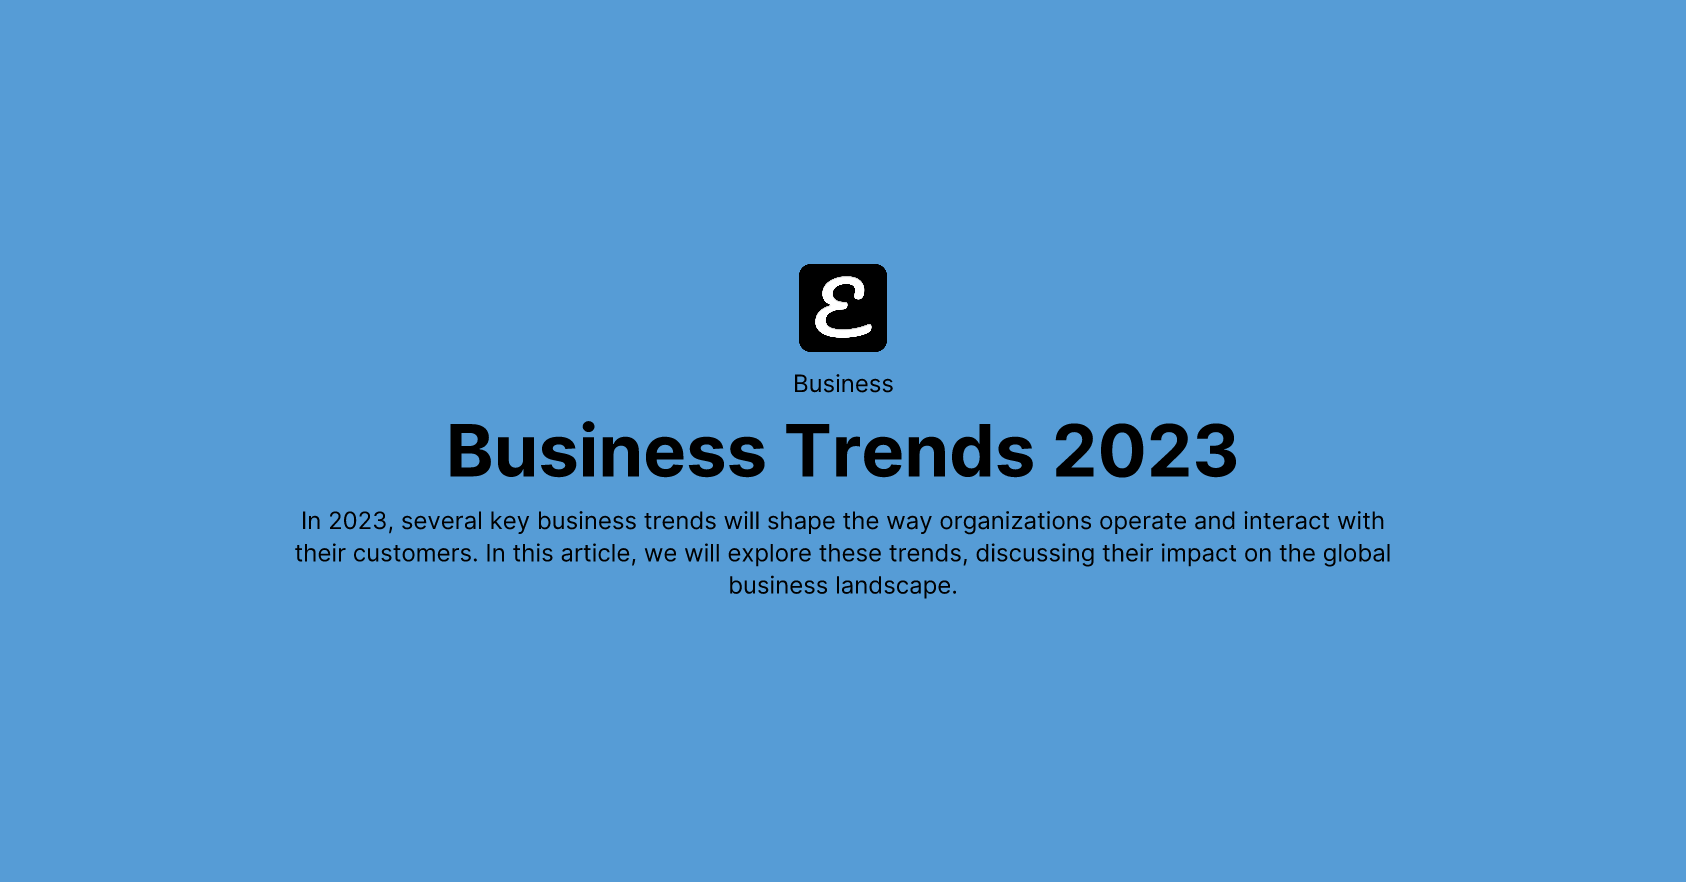 Business Trends 2023 by Eric David Smith